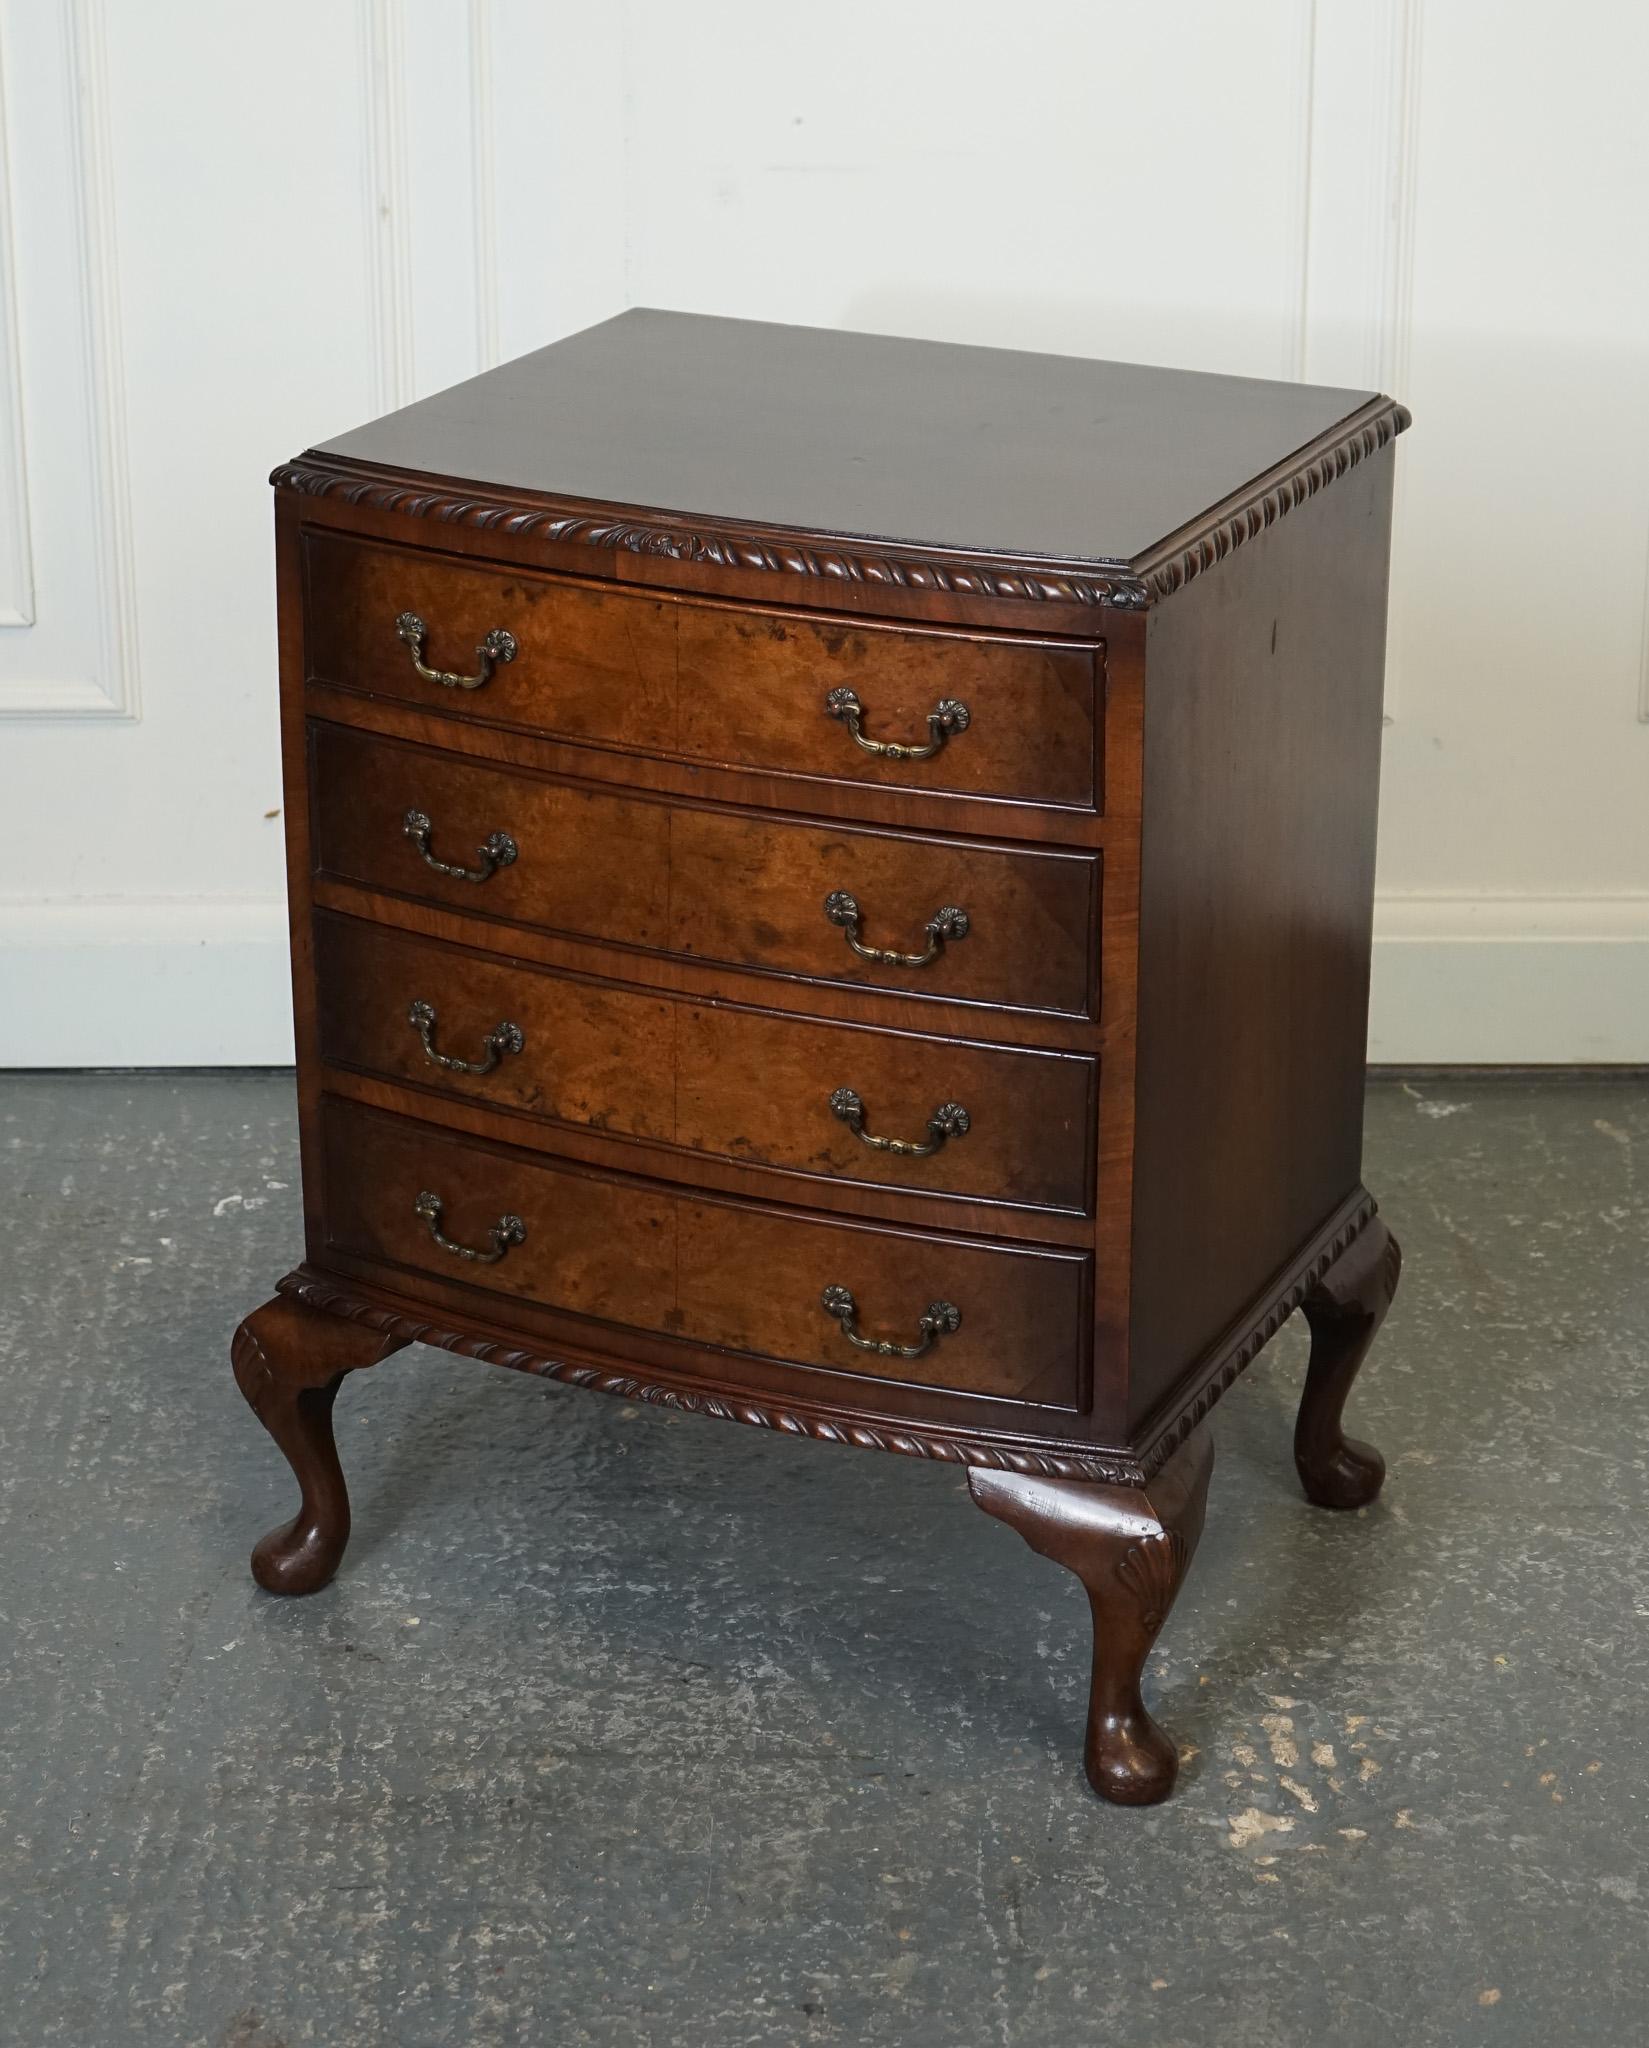 Antiques of London



We are delighted to offer for sale this Lovely Figured Victorian Walnut Bow Fronted Chest Of Drawers.

A figured Victorian walnut bow-fronted chest of drawers is a stunning piece of furniture that exudes elegance and